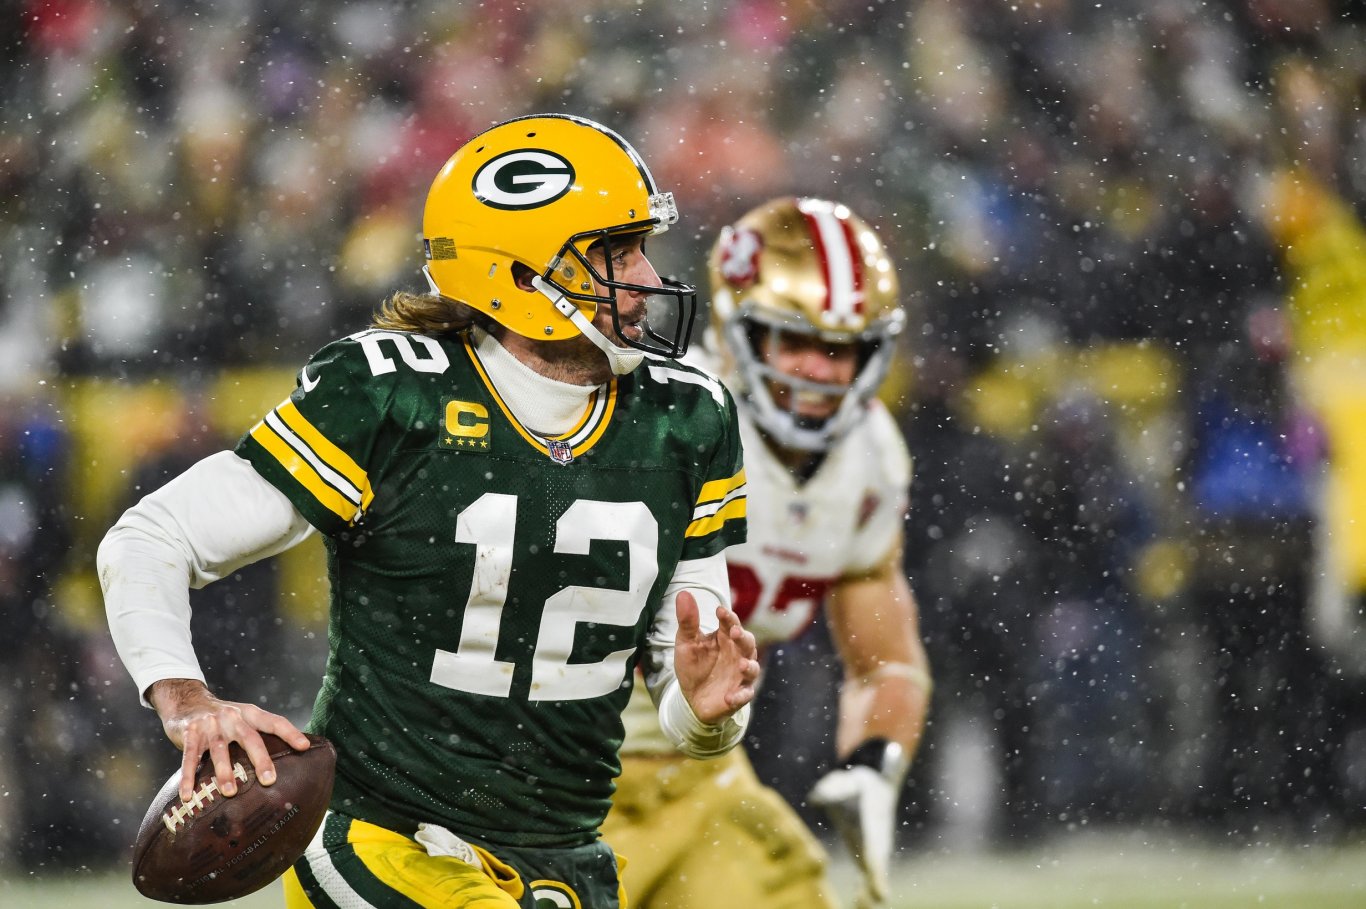 Aaron Rodgers opens season as NFL's oldest player: QB's age marks a rarity  the league has not seen in 30 years 